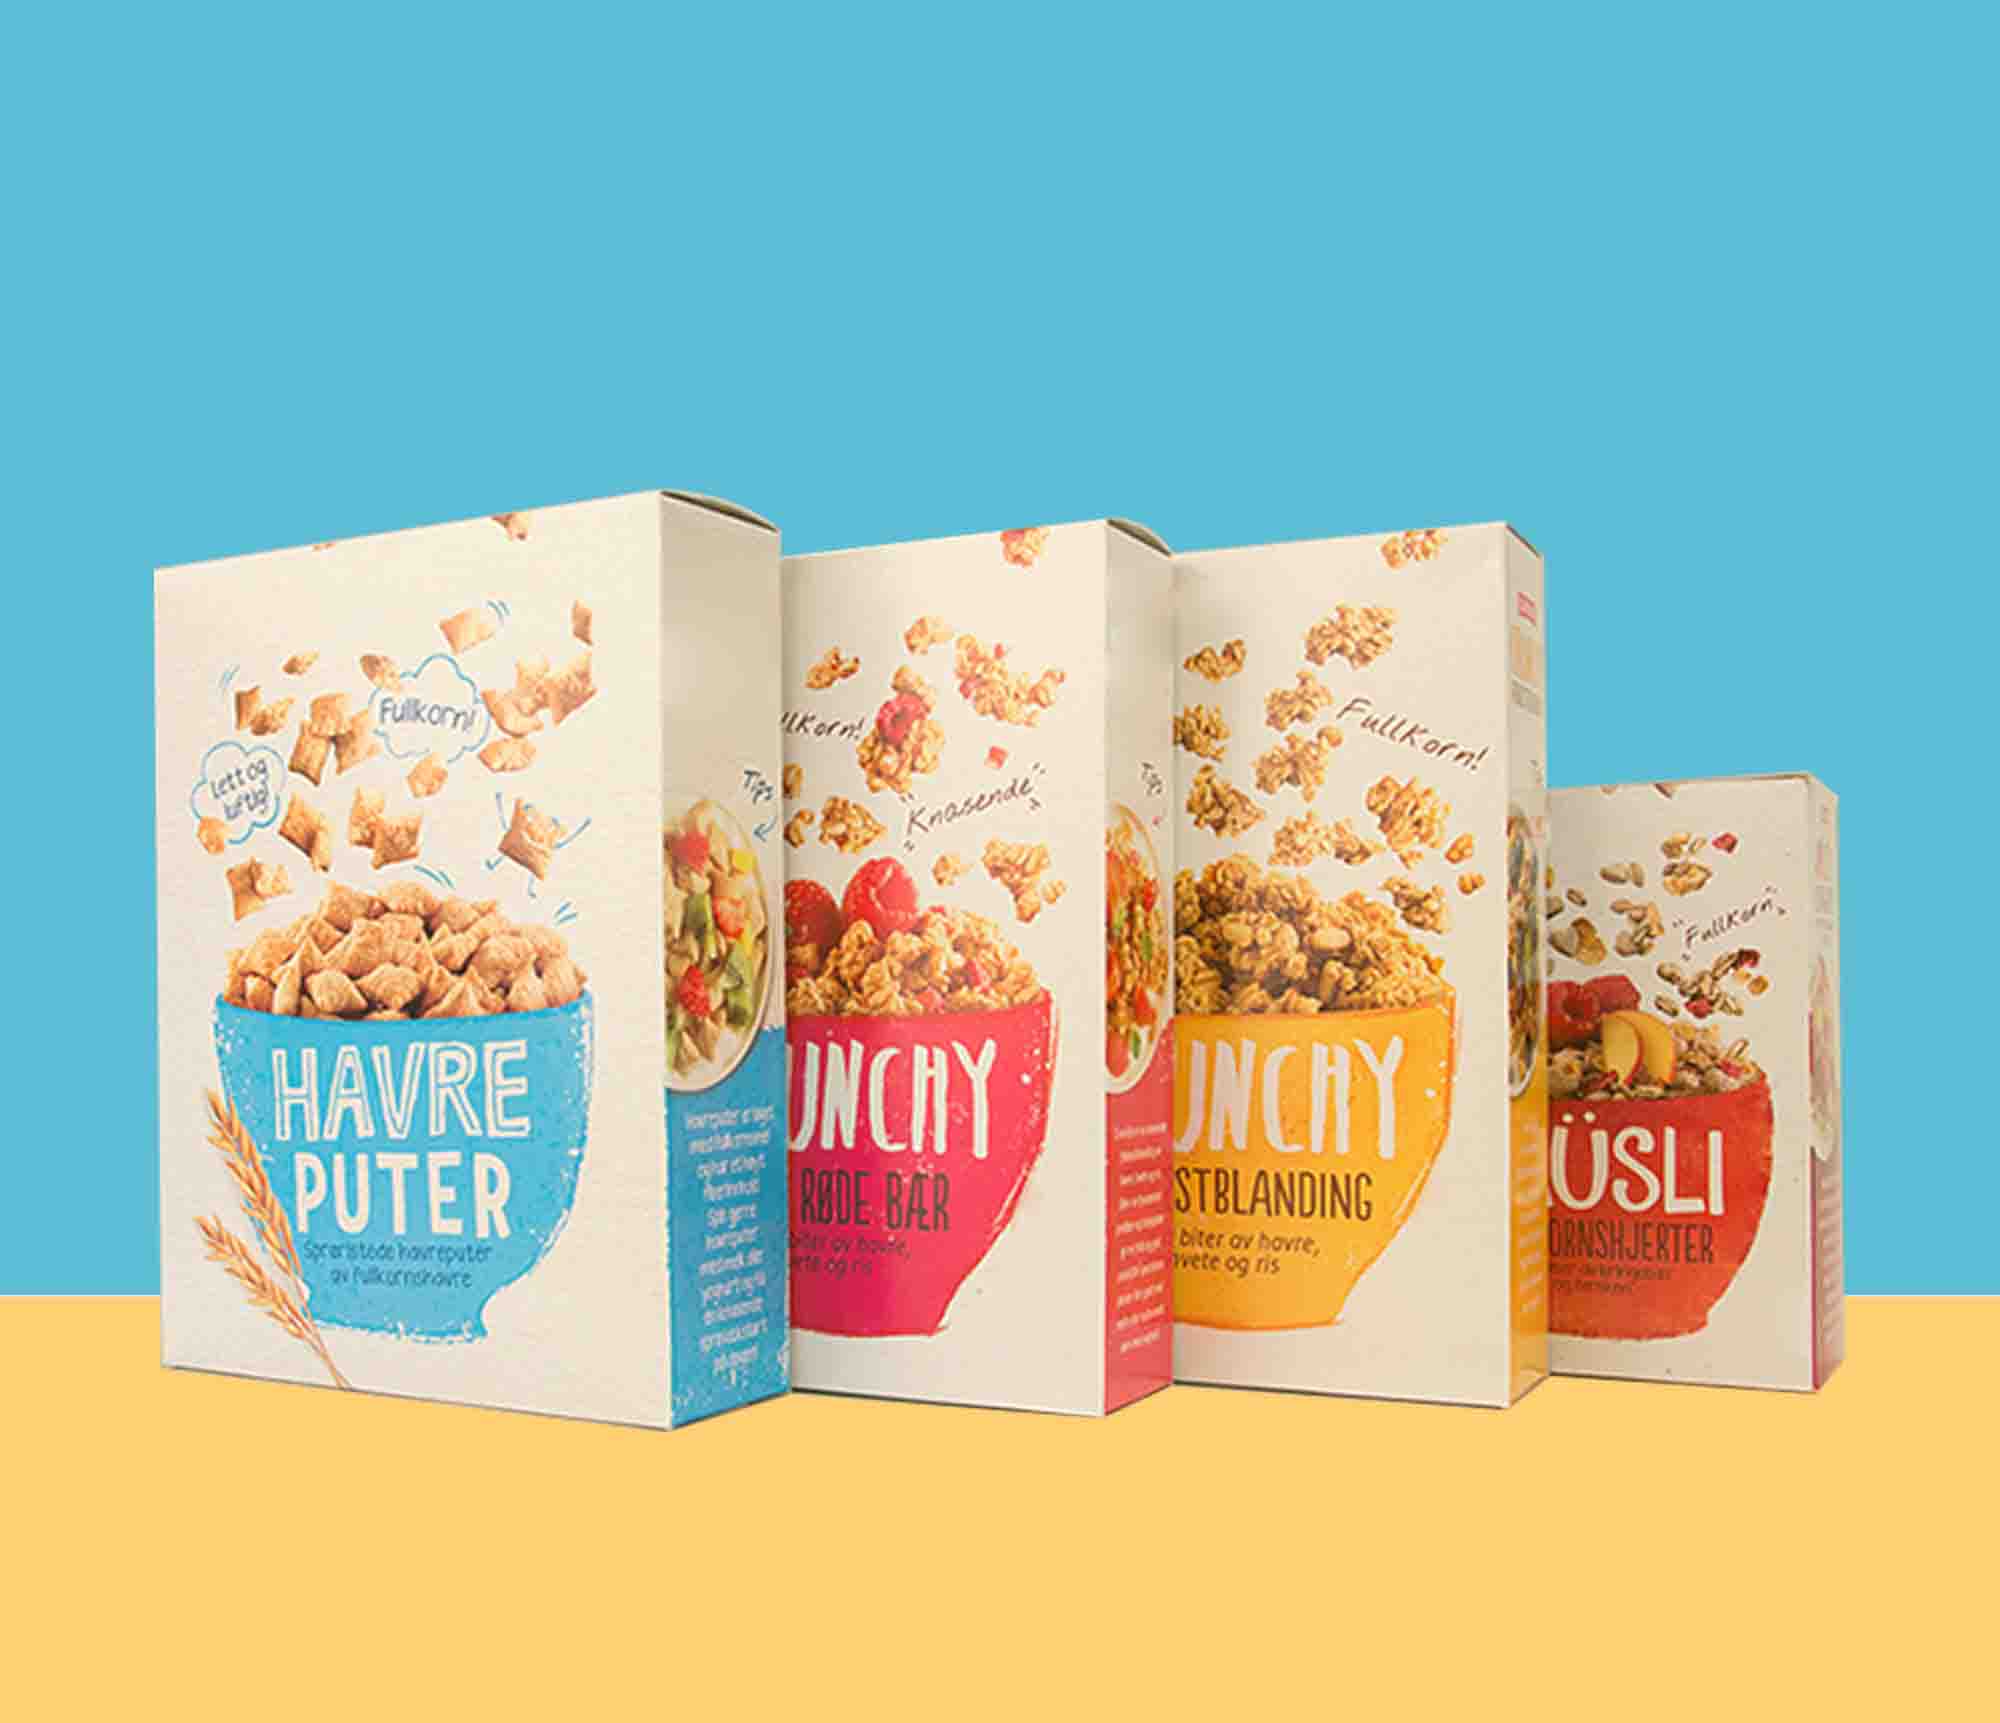 Cereal Boxes Wholesale